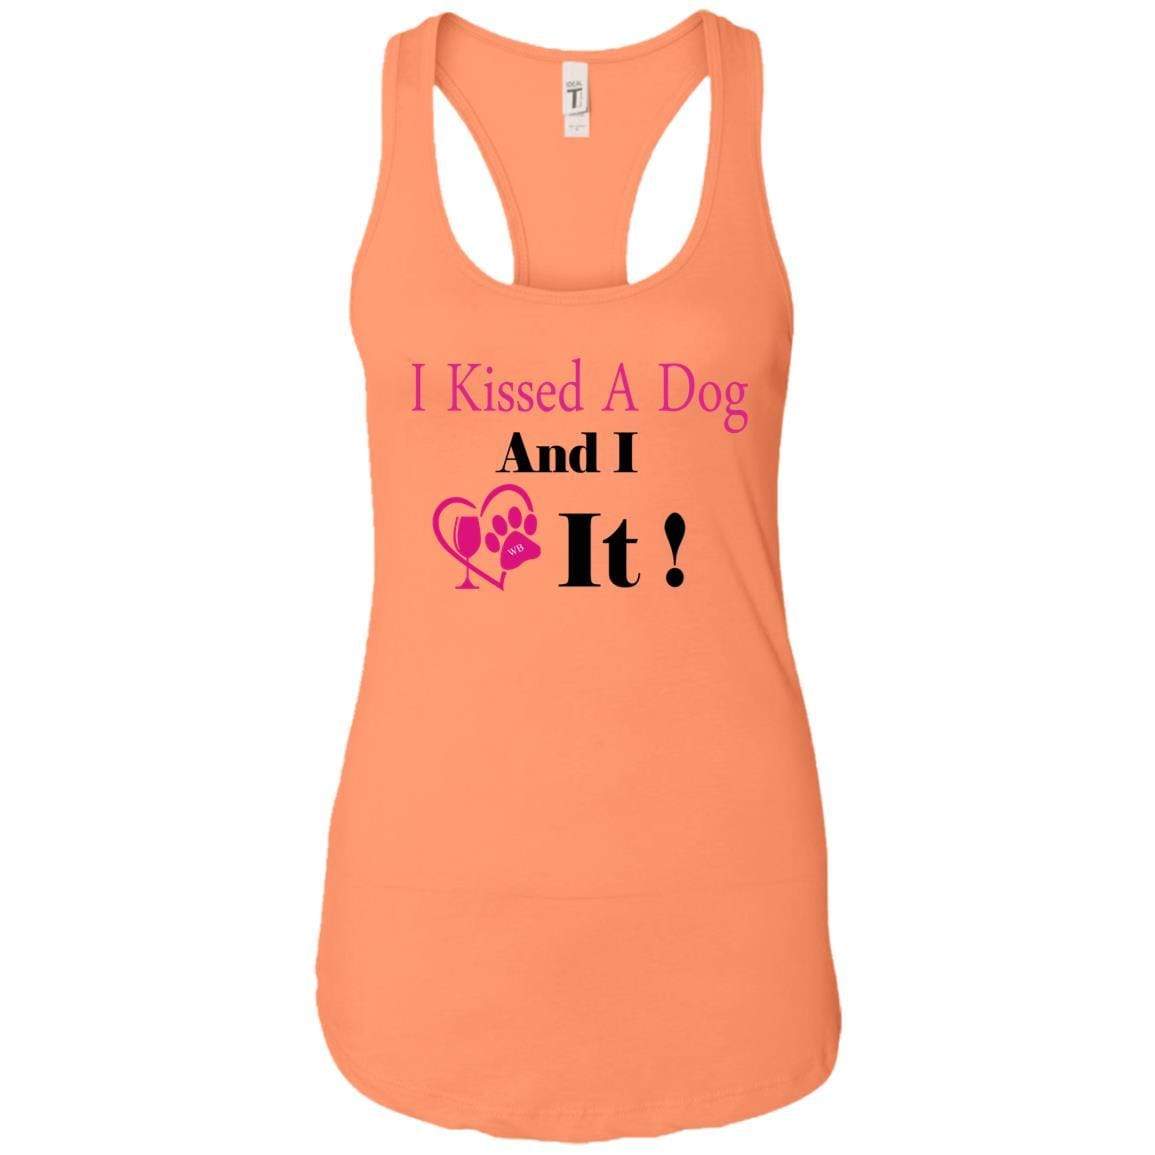 Tank Top Light Orange / X-Small WineyBitches.co "I Kissed A Dog And I Loved It:" Ladies Ideal Racerback Tank WineyBitchesCo